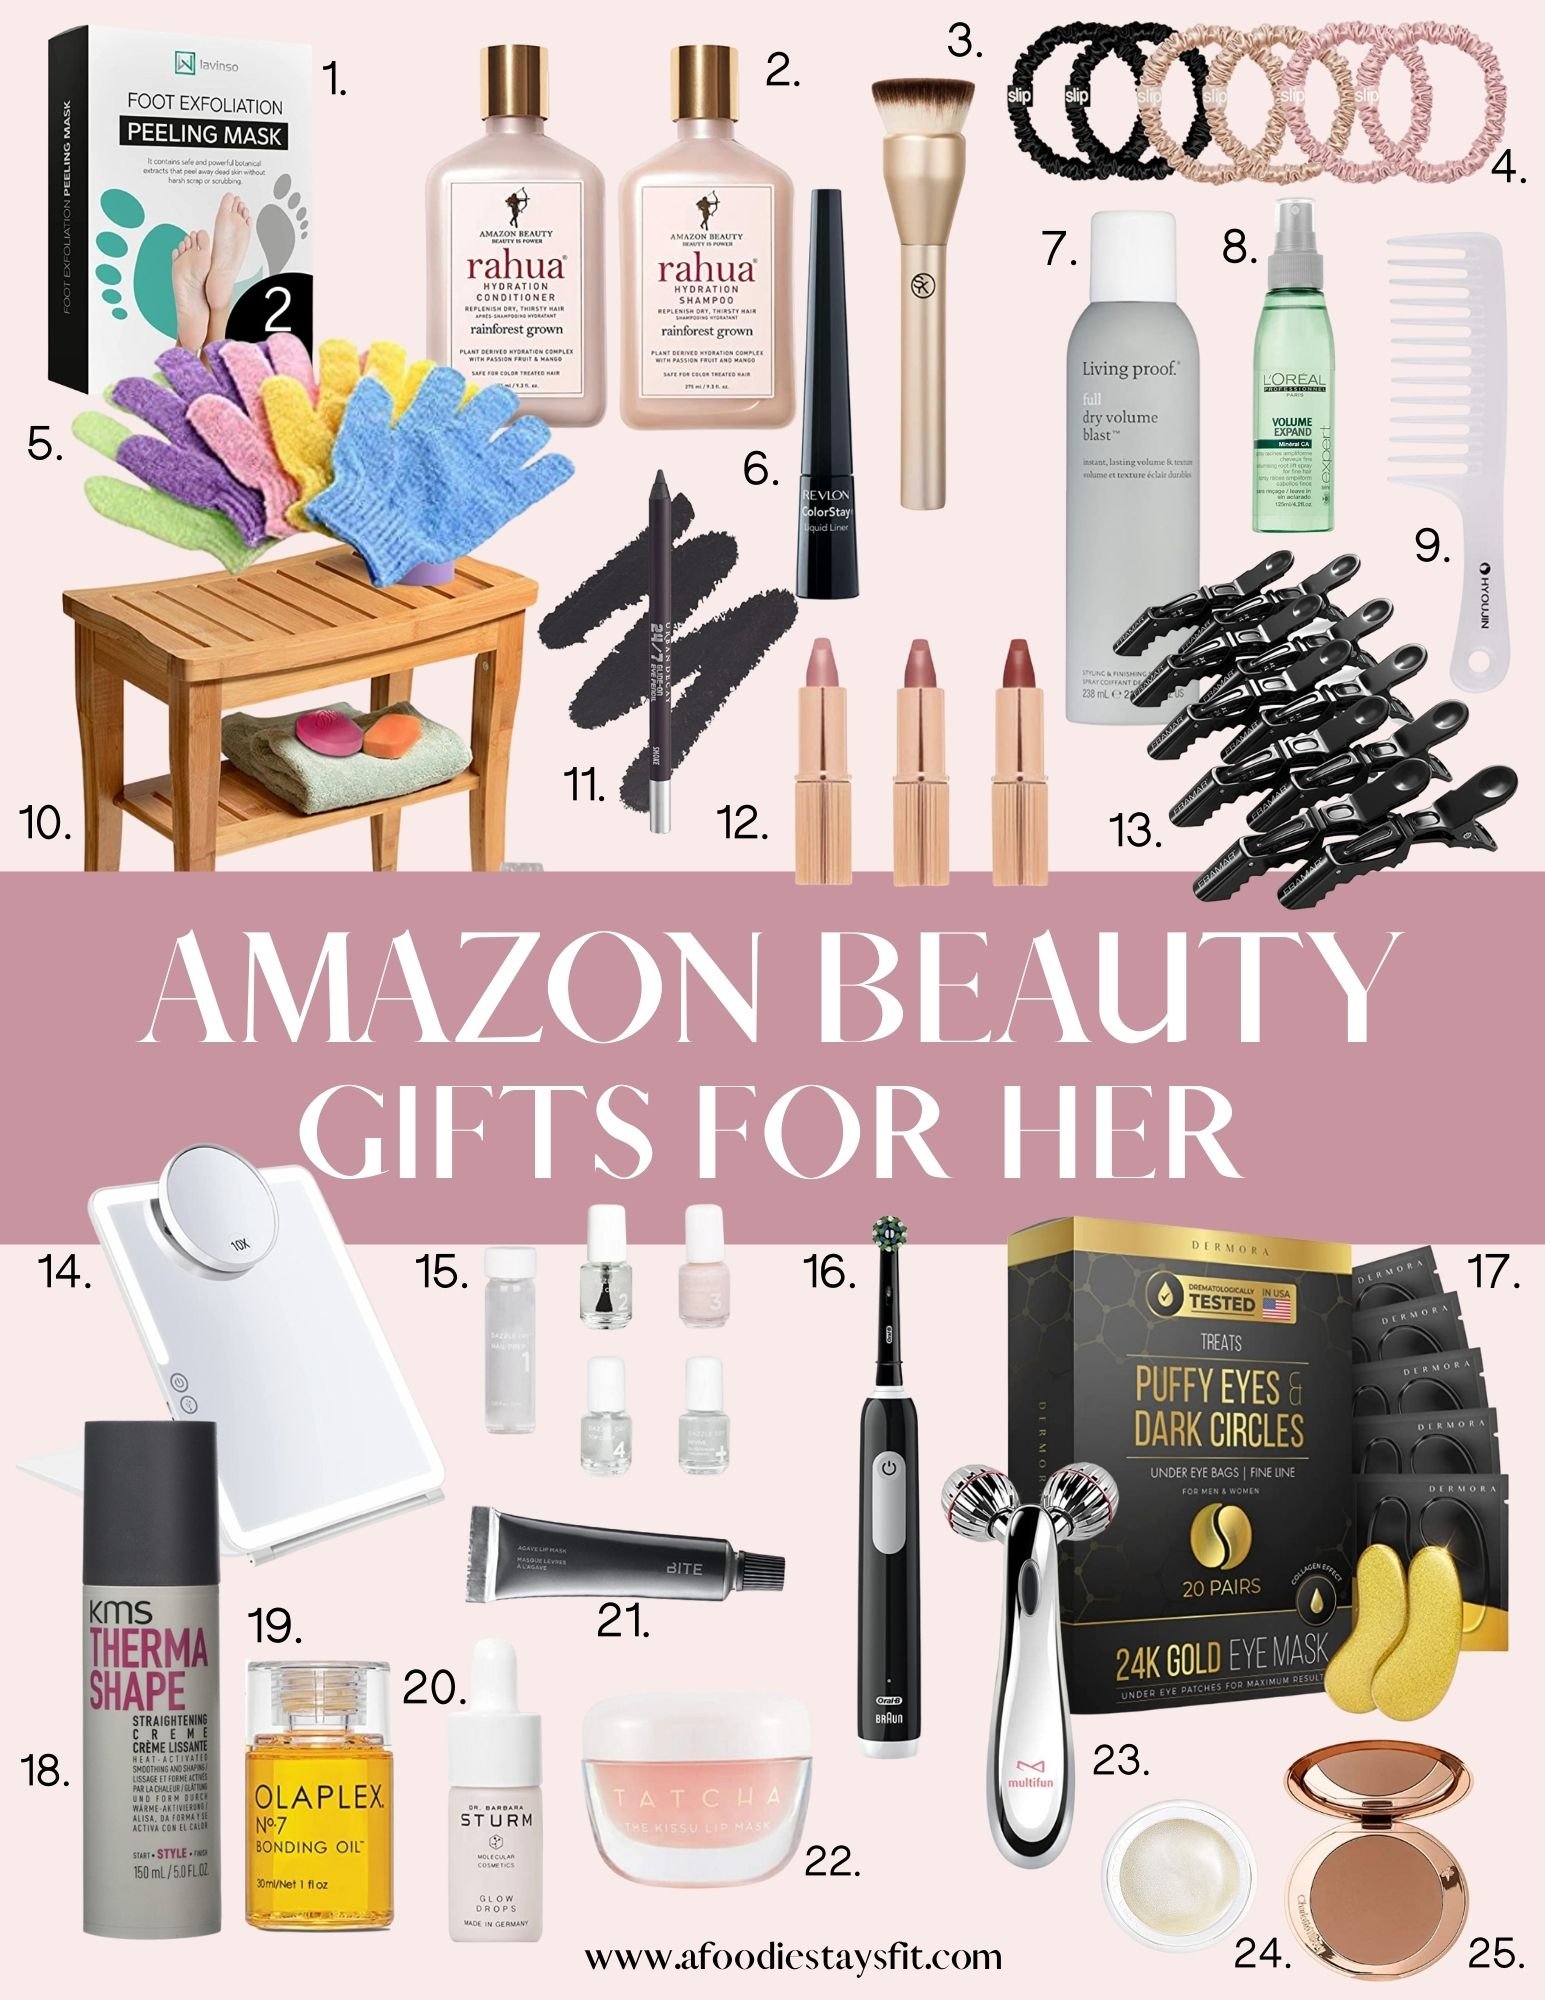 Amazon Beauty Gifts for Her - 2022 Gift Guides